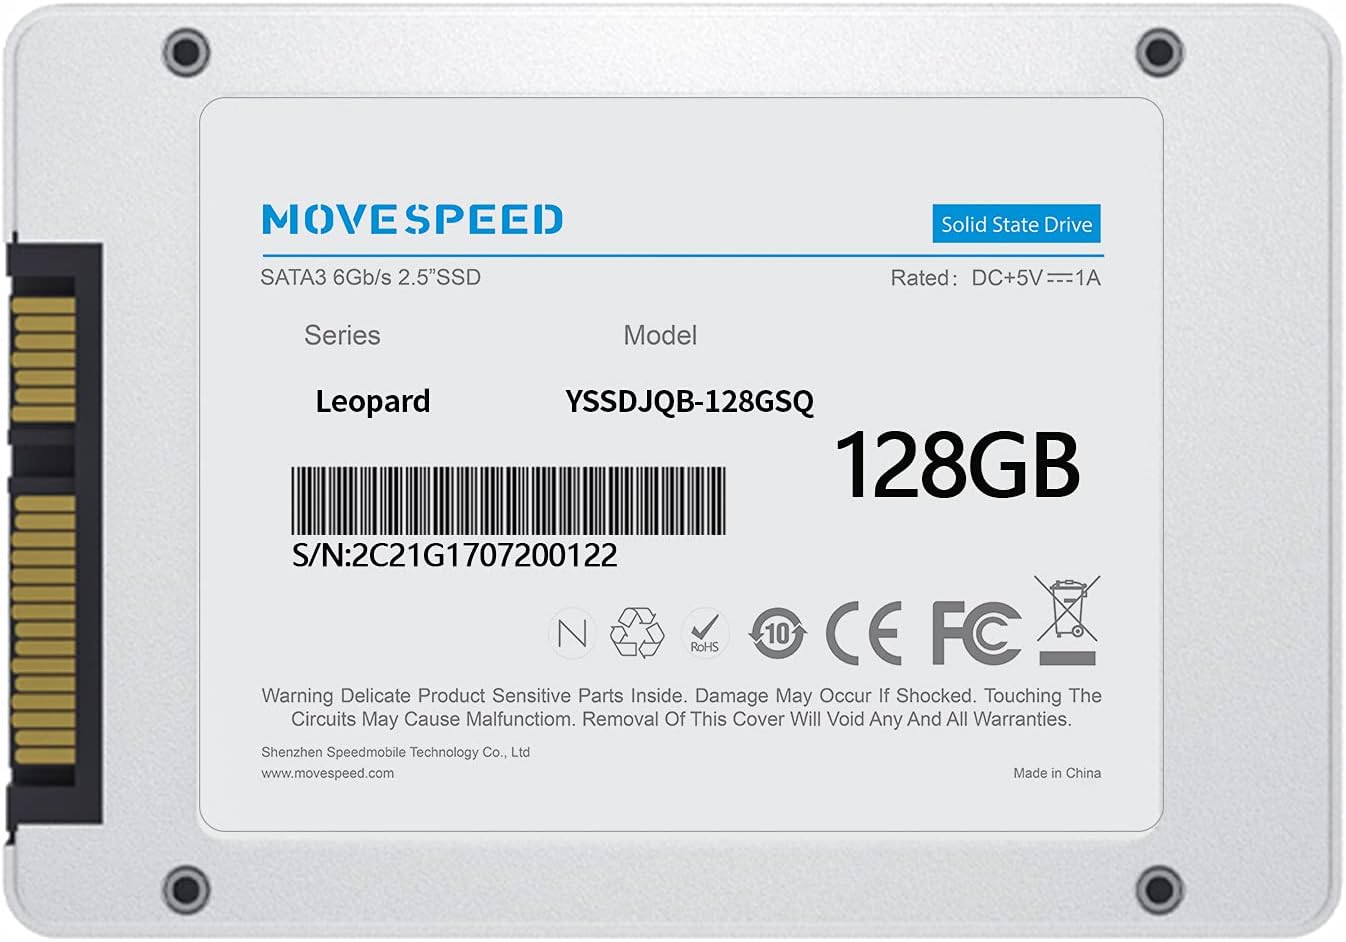 MOVE SPEED 1TB 3D NAND Internal PC SSD - SATA III 6 Gb/s, 2.5/7mm Internal Solid State Drive, Up to 540 MB/s